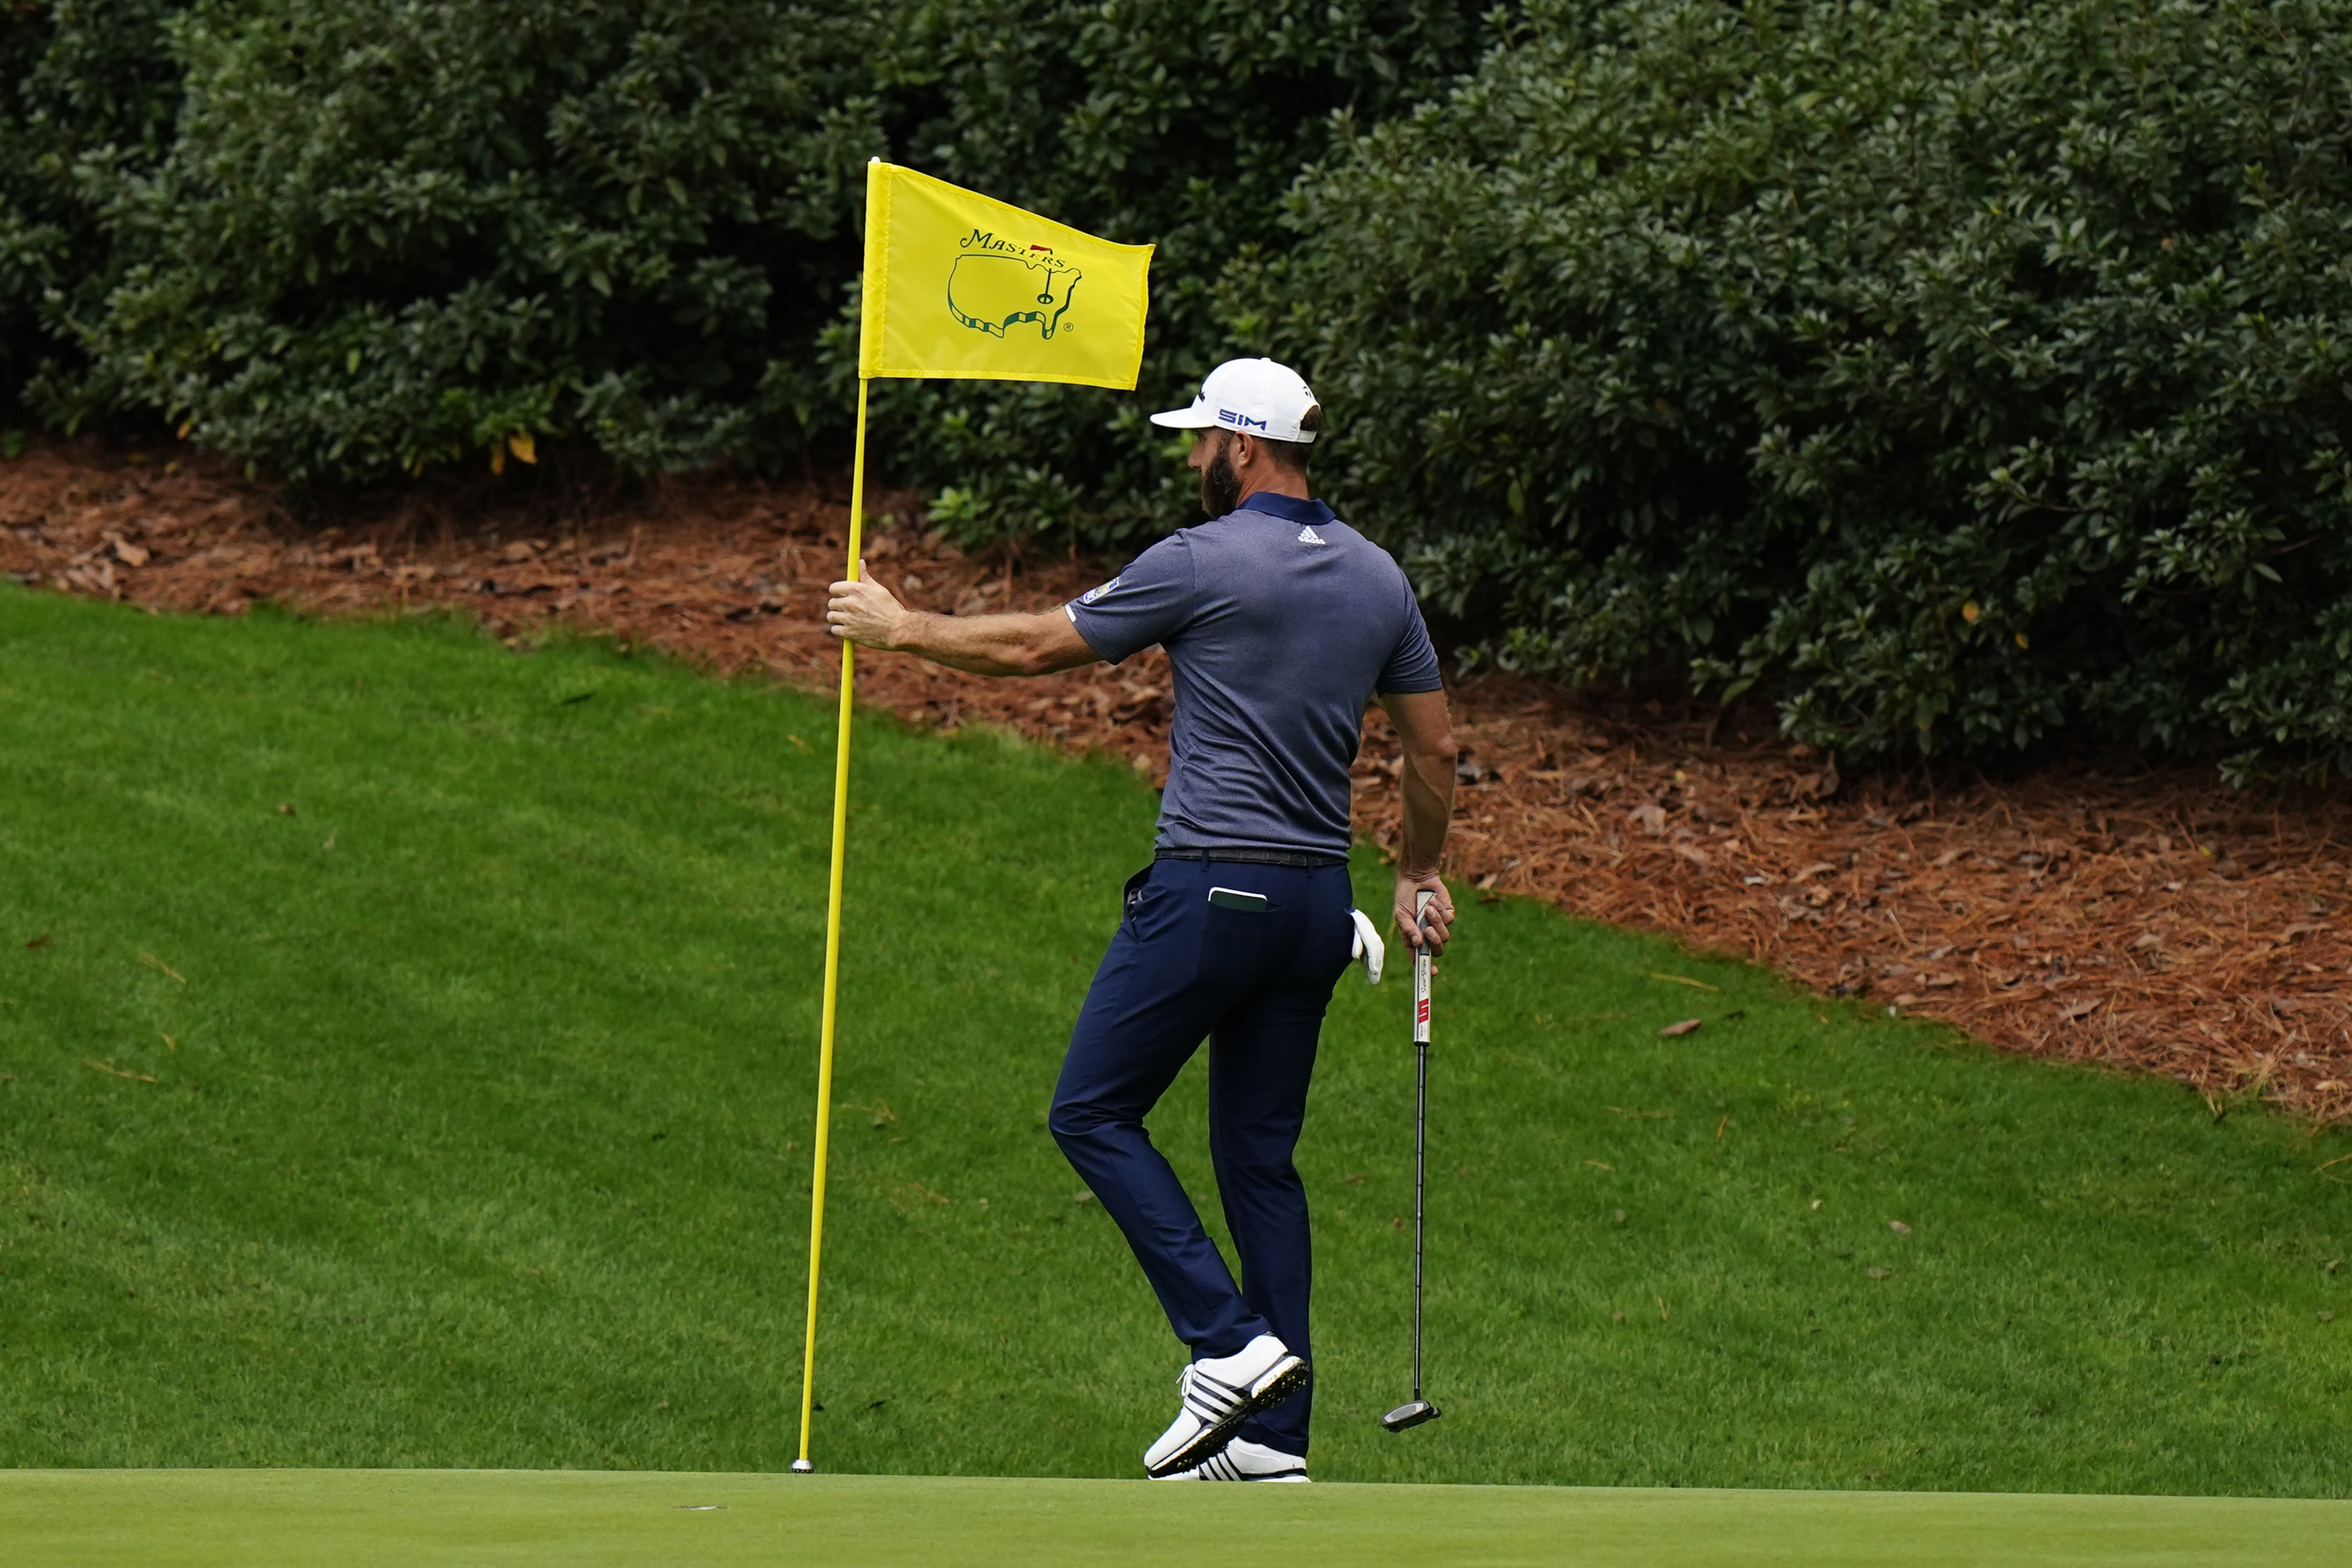 How to watch 2020 The Masters golf tournament FREE live streams, dates, times, USA TV, channels